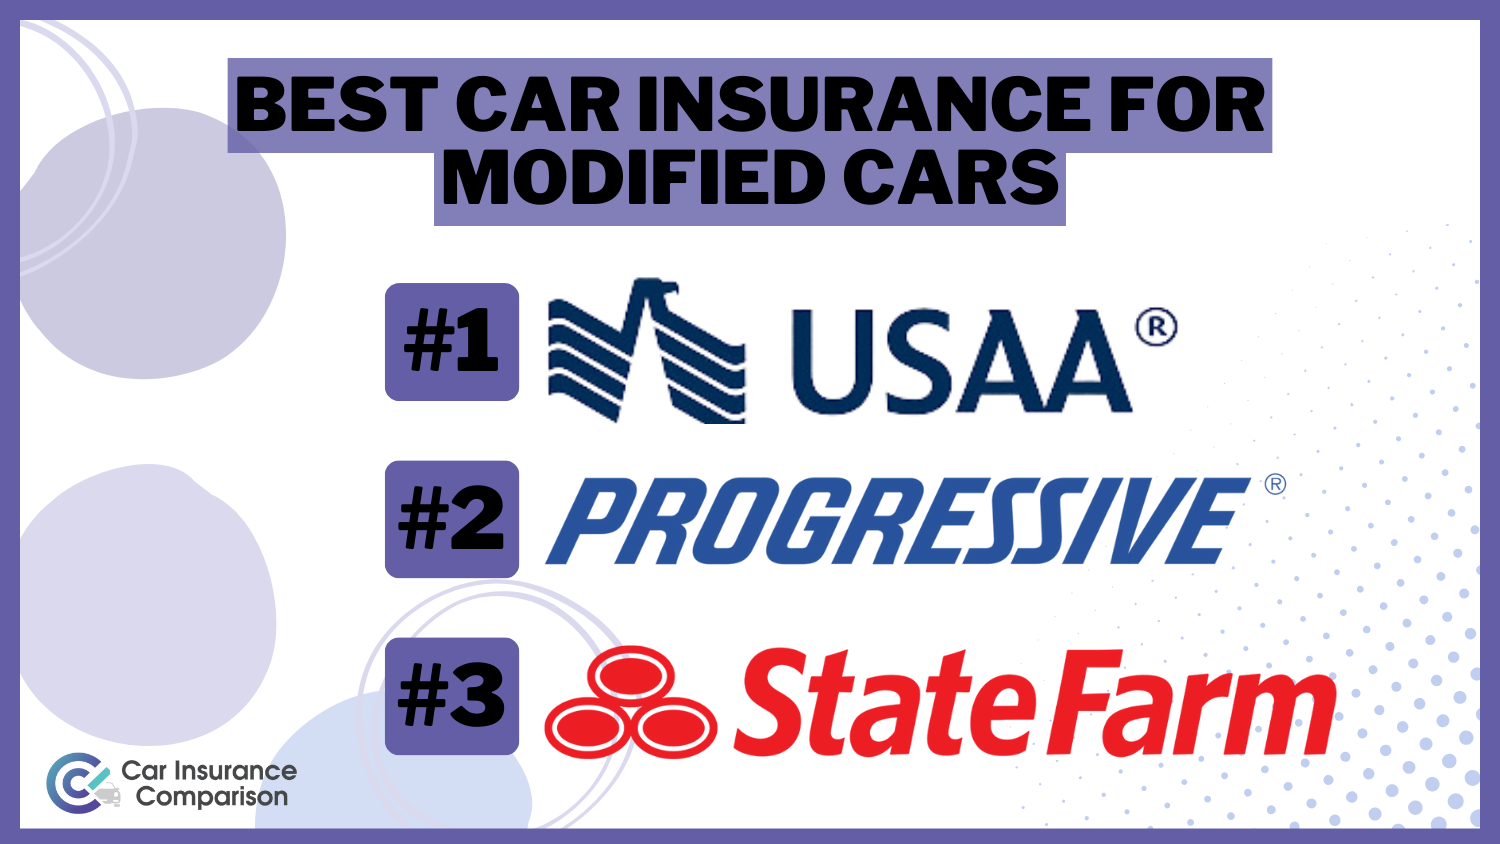 Best Car Insurance for Modified Cars: USAA, Progressive, and State Farm